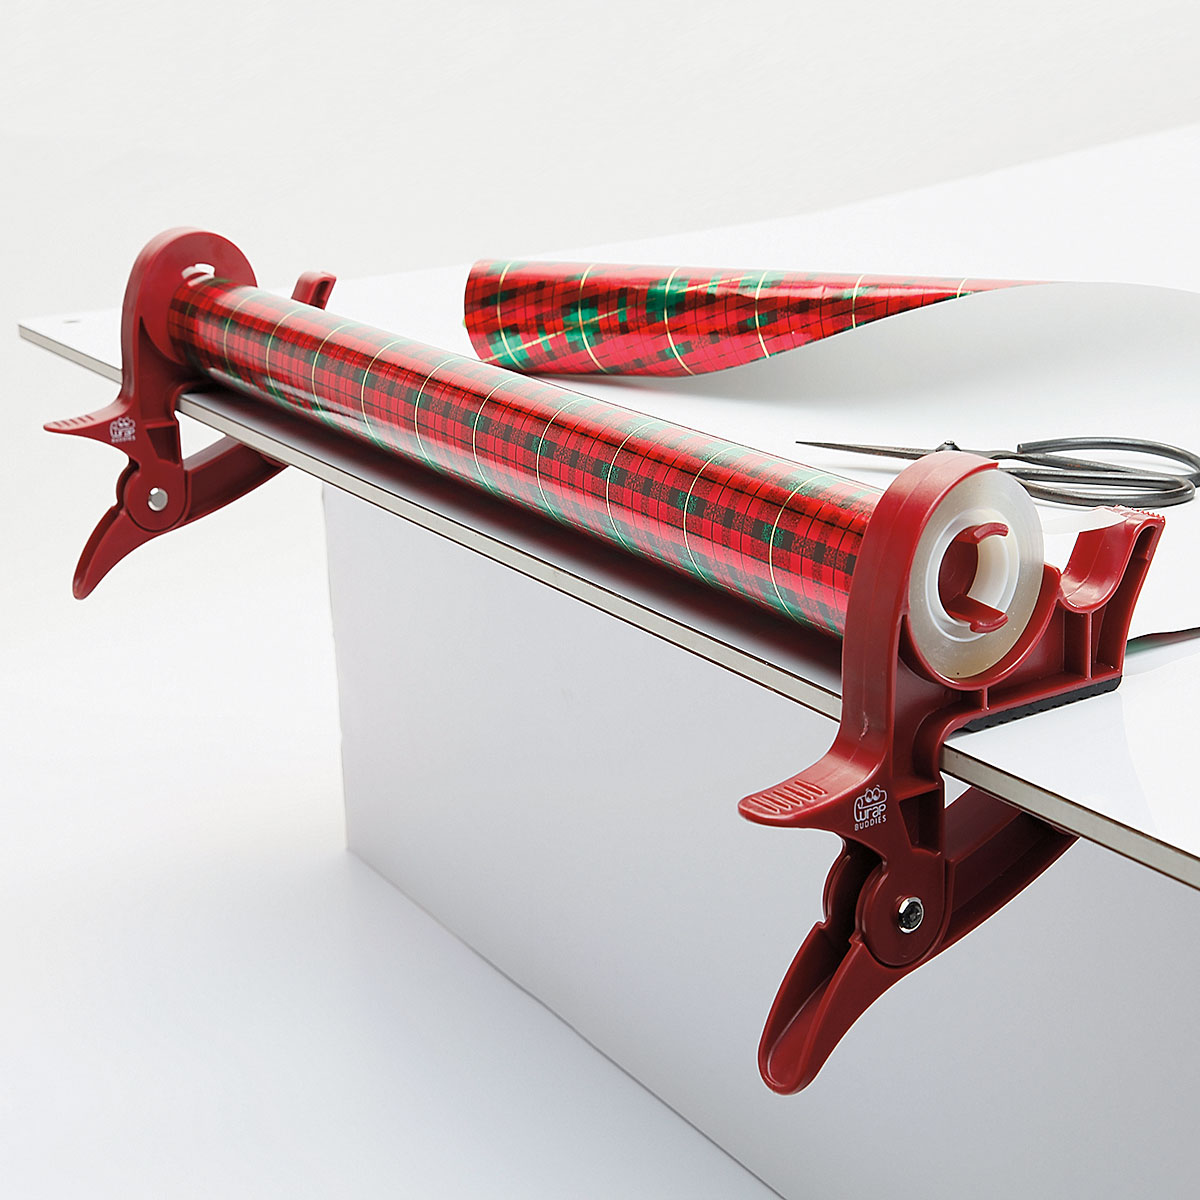 WRAP BUDDIES  World's Simplest Gift Wrap Assistant by Bret